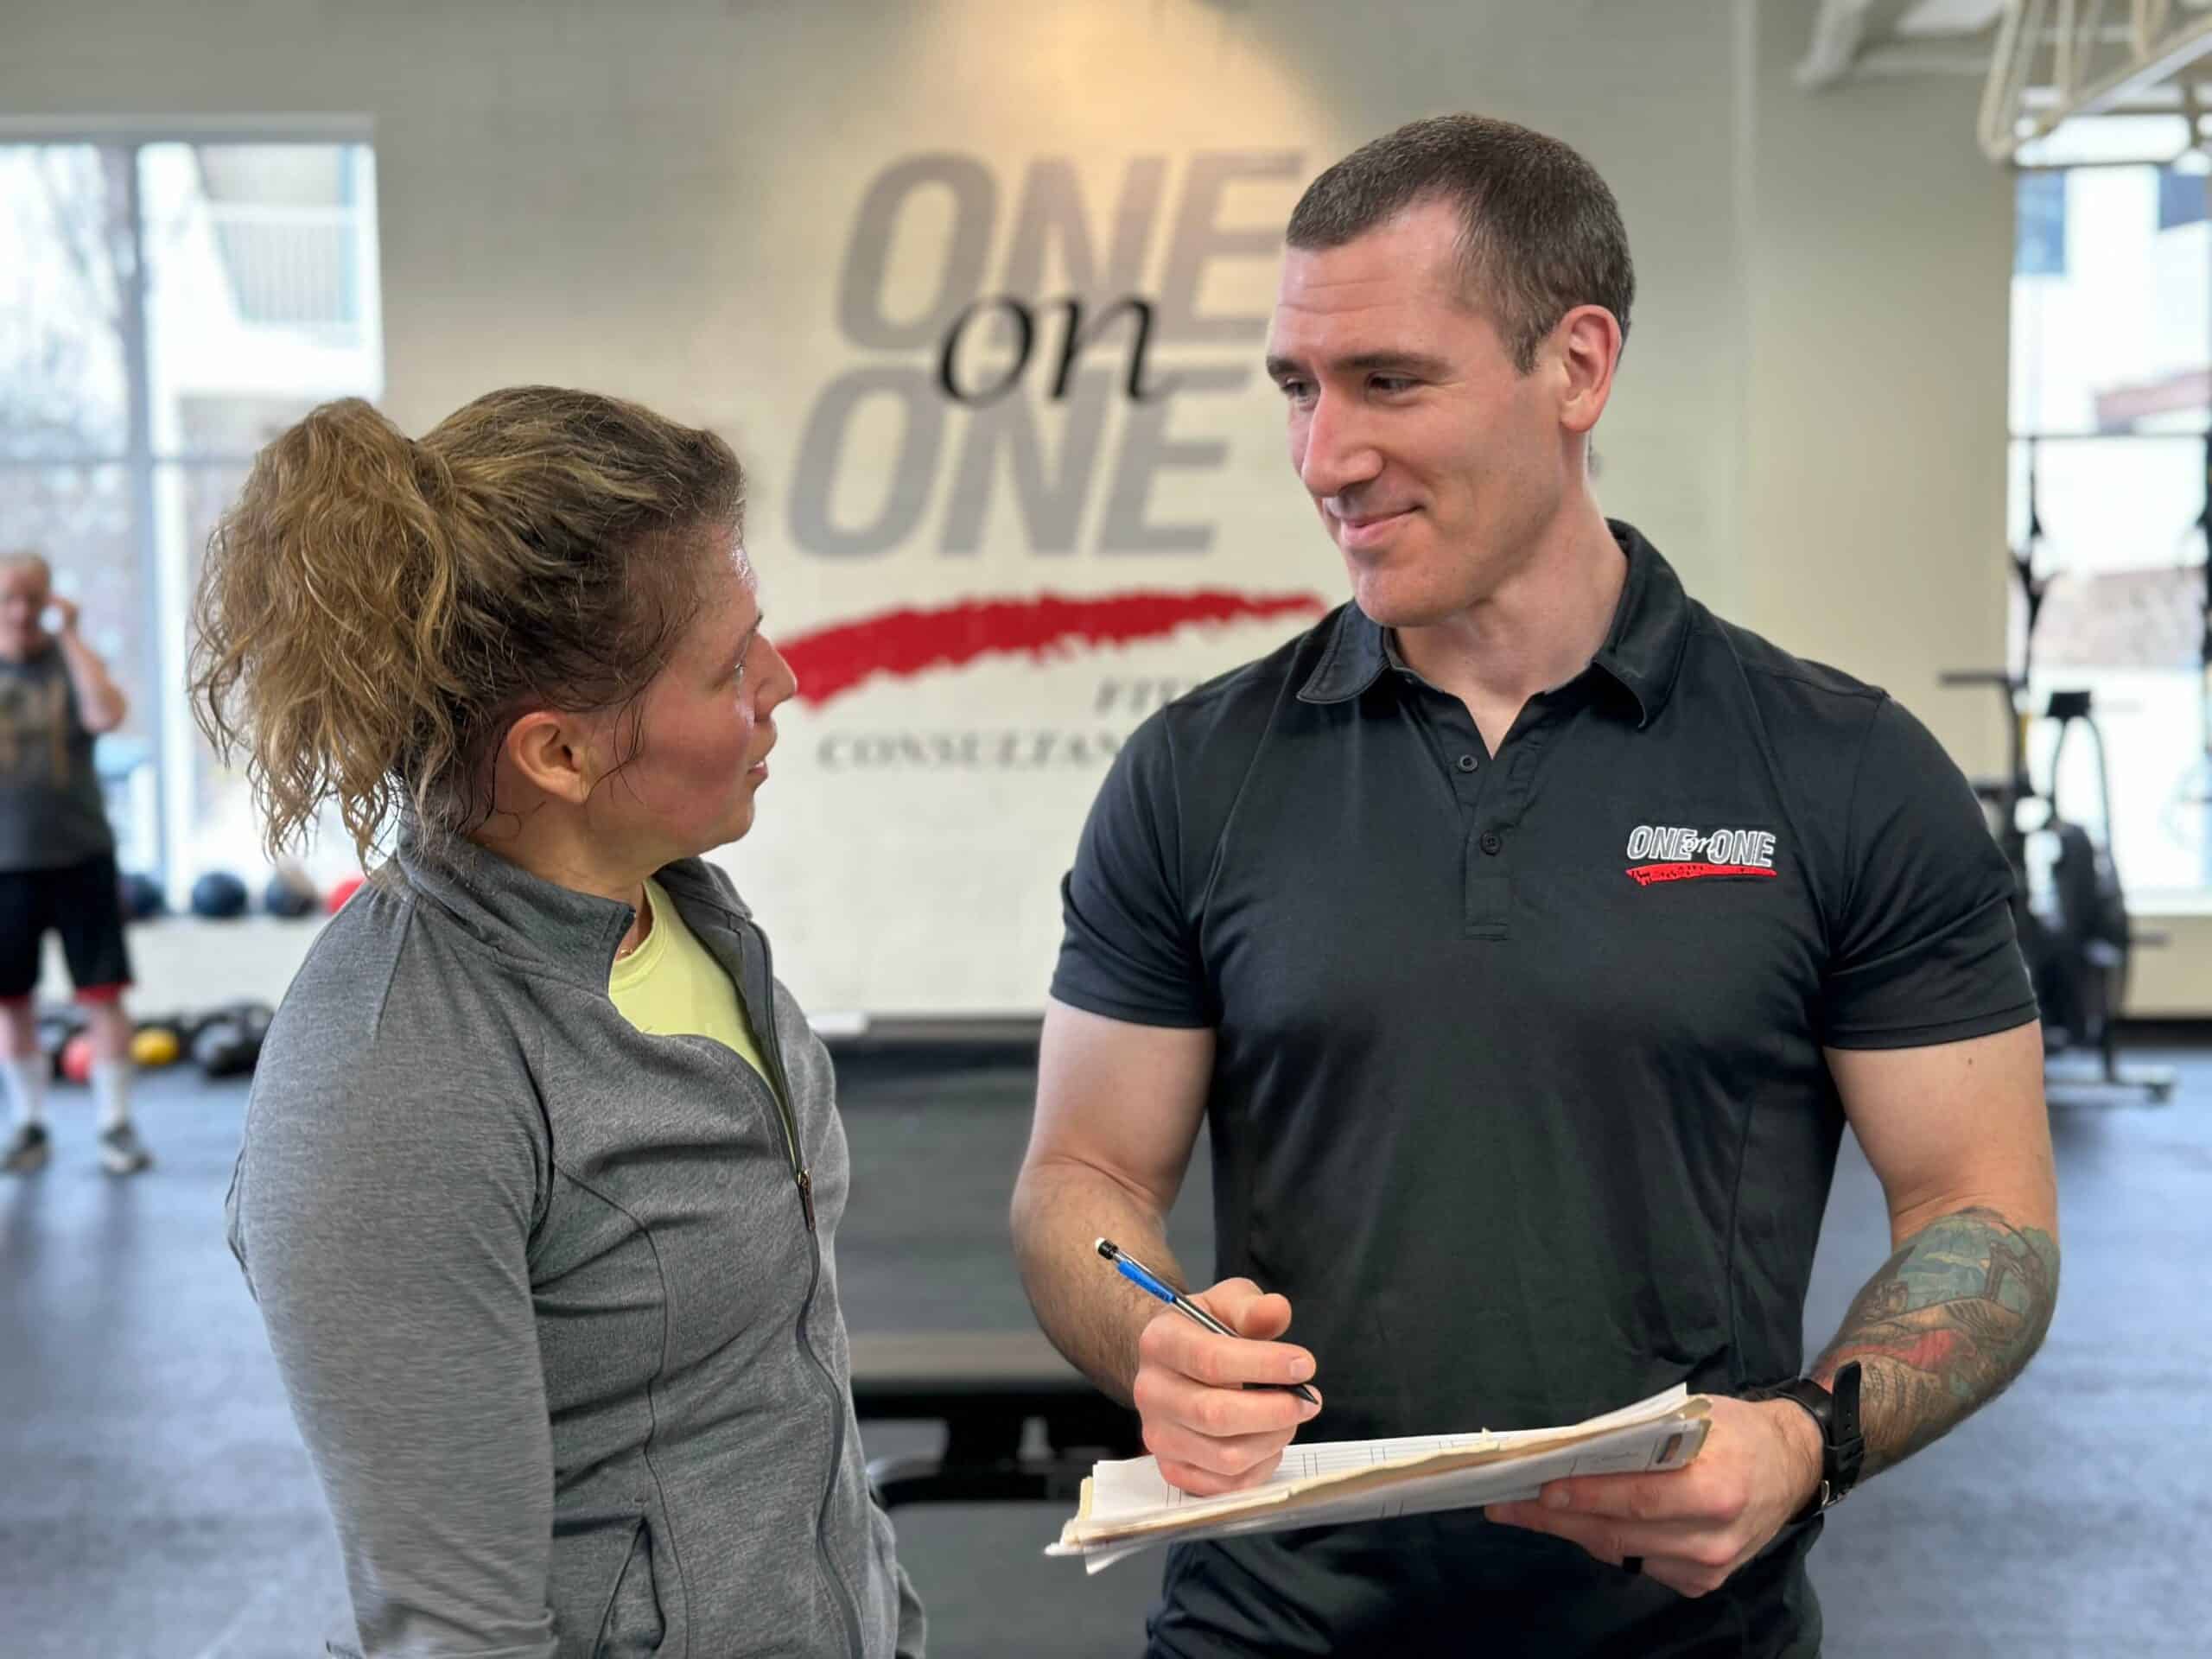 Personal trainer and registered dietitian Geoff Borro consulting with a client in the gym